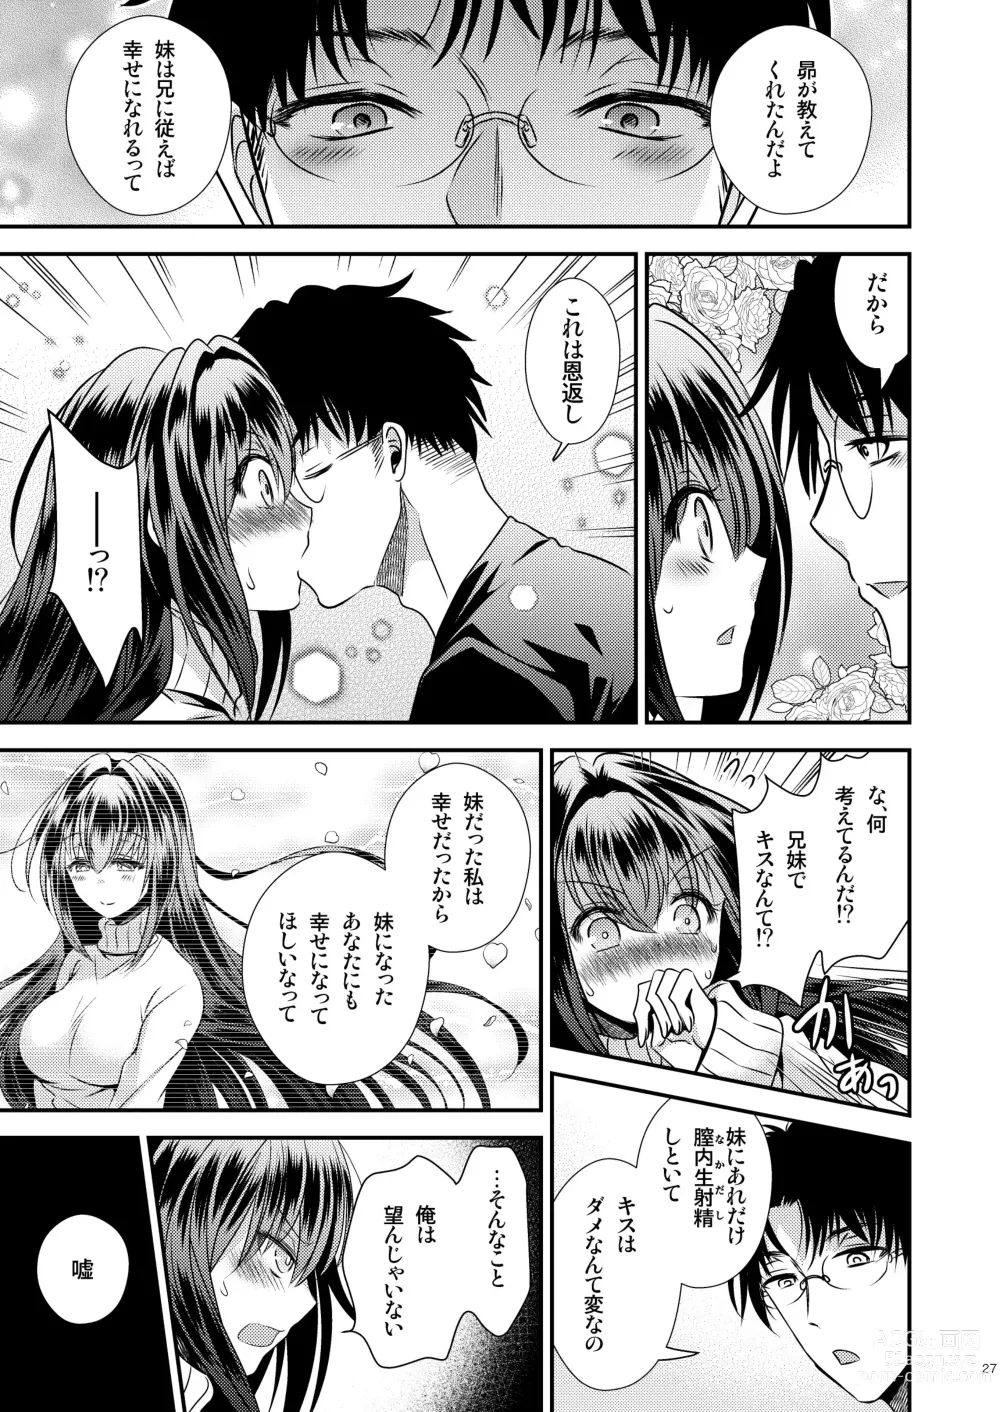 Page 27 of doujinshi 性欲処理に使っていた妹と入れ替わった兄